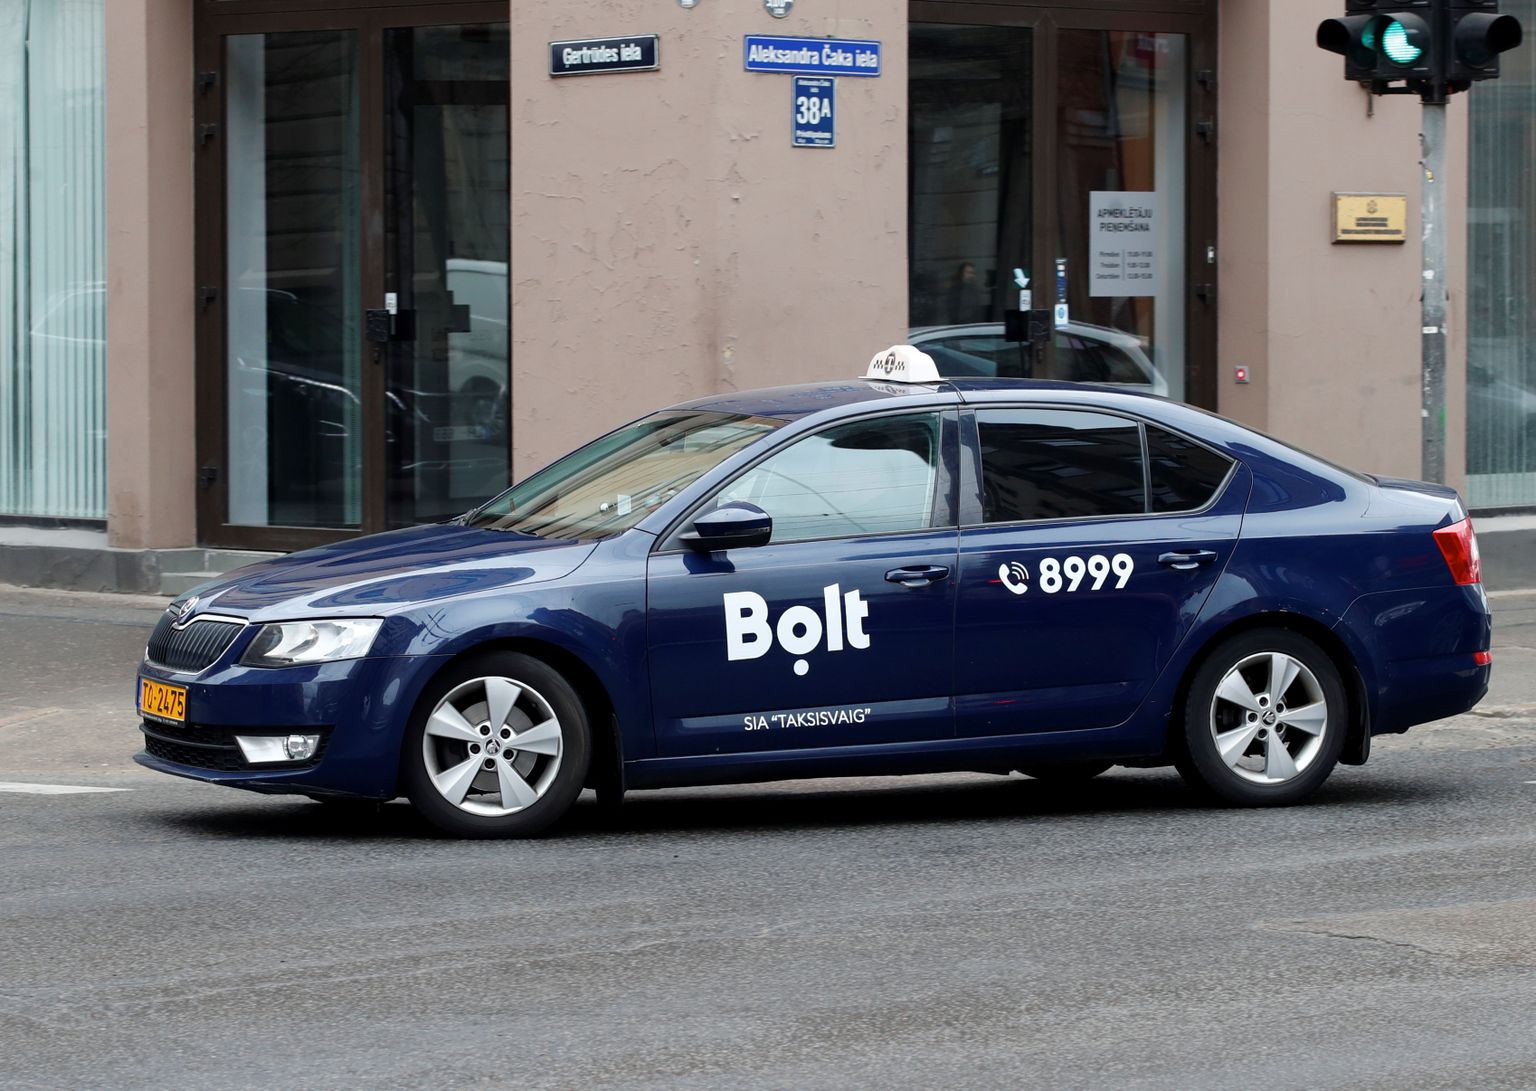 Bolt has become the dominant player on the Latvian taxi market.